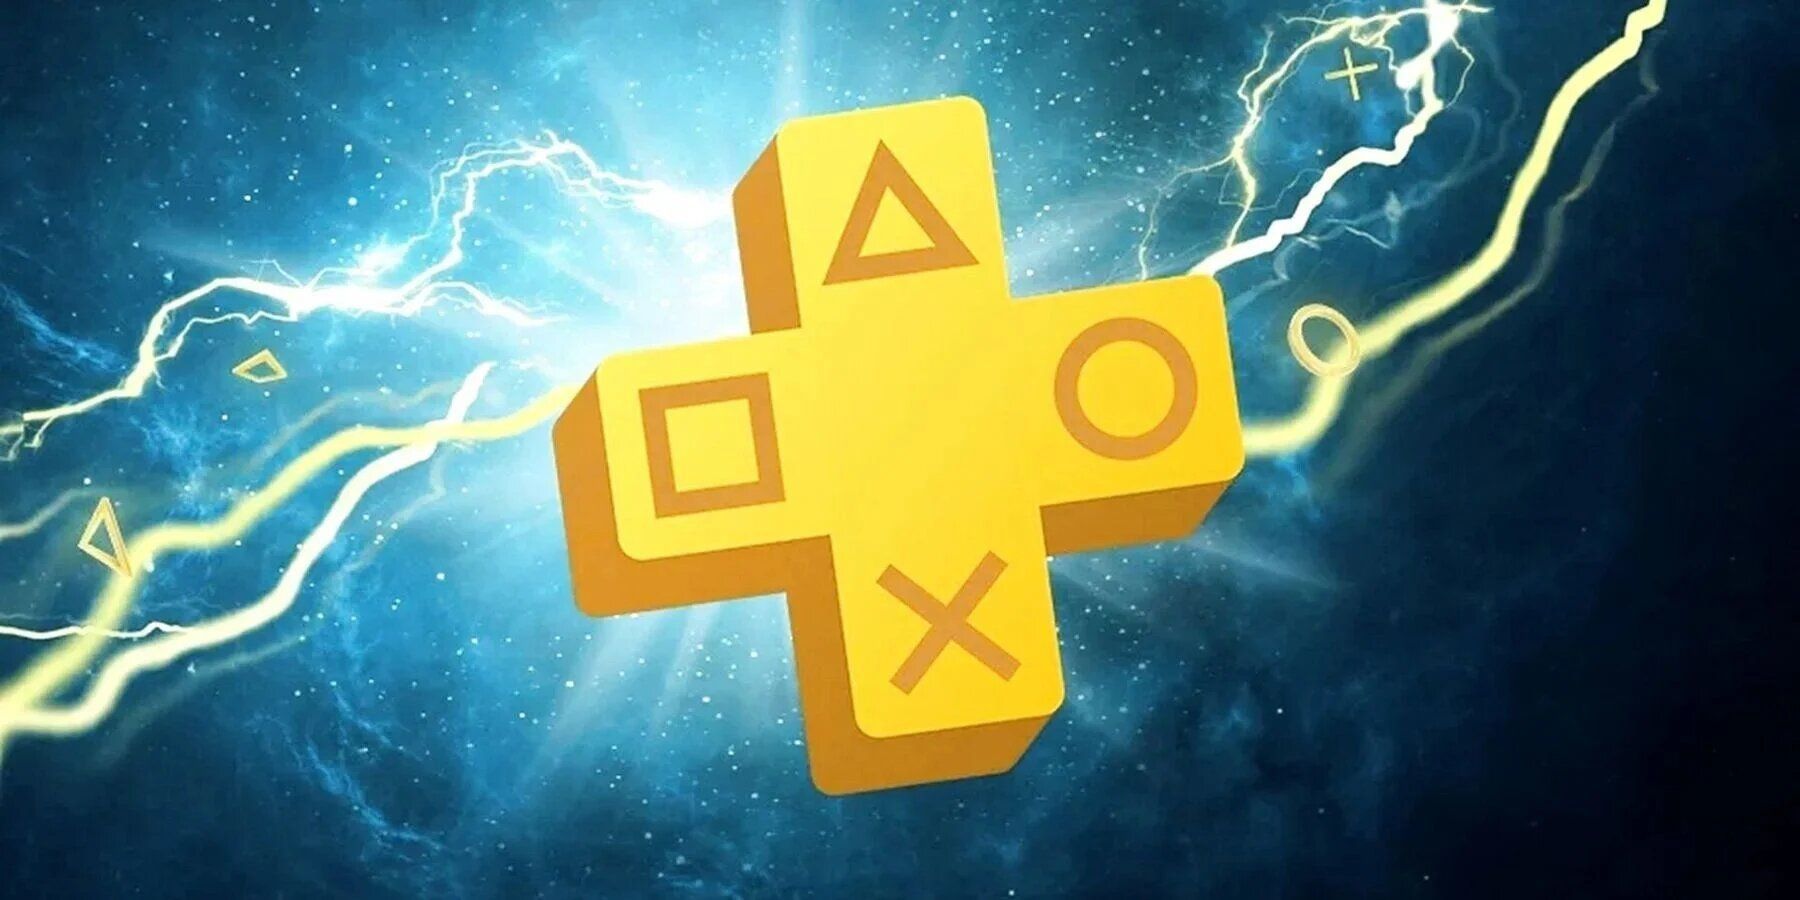 PS Plus: Here's When the April 2023 New Games Come Out